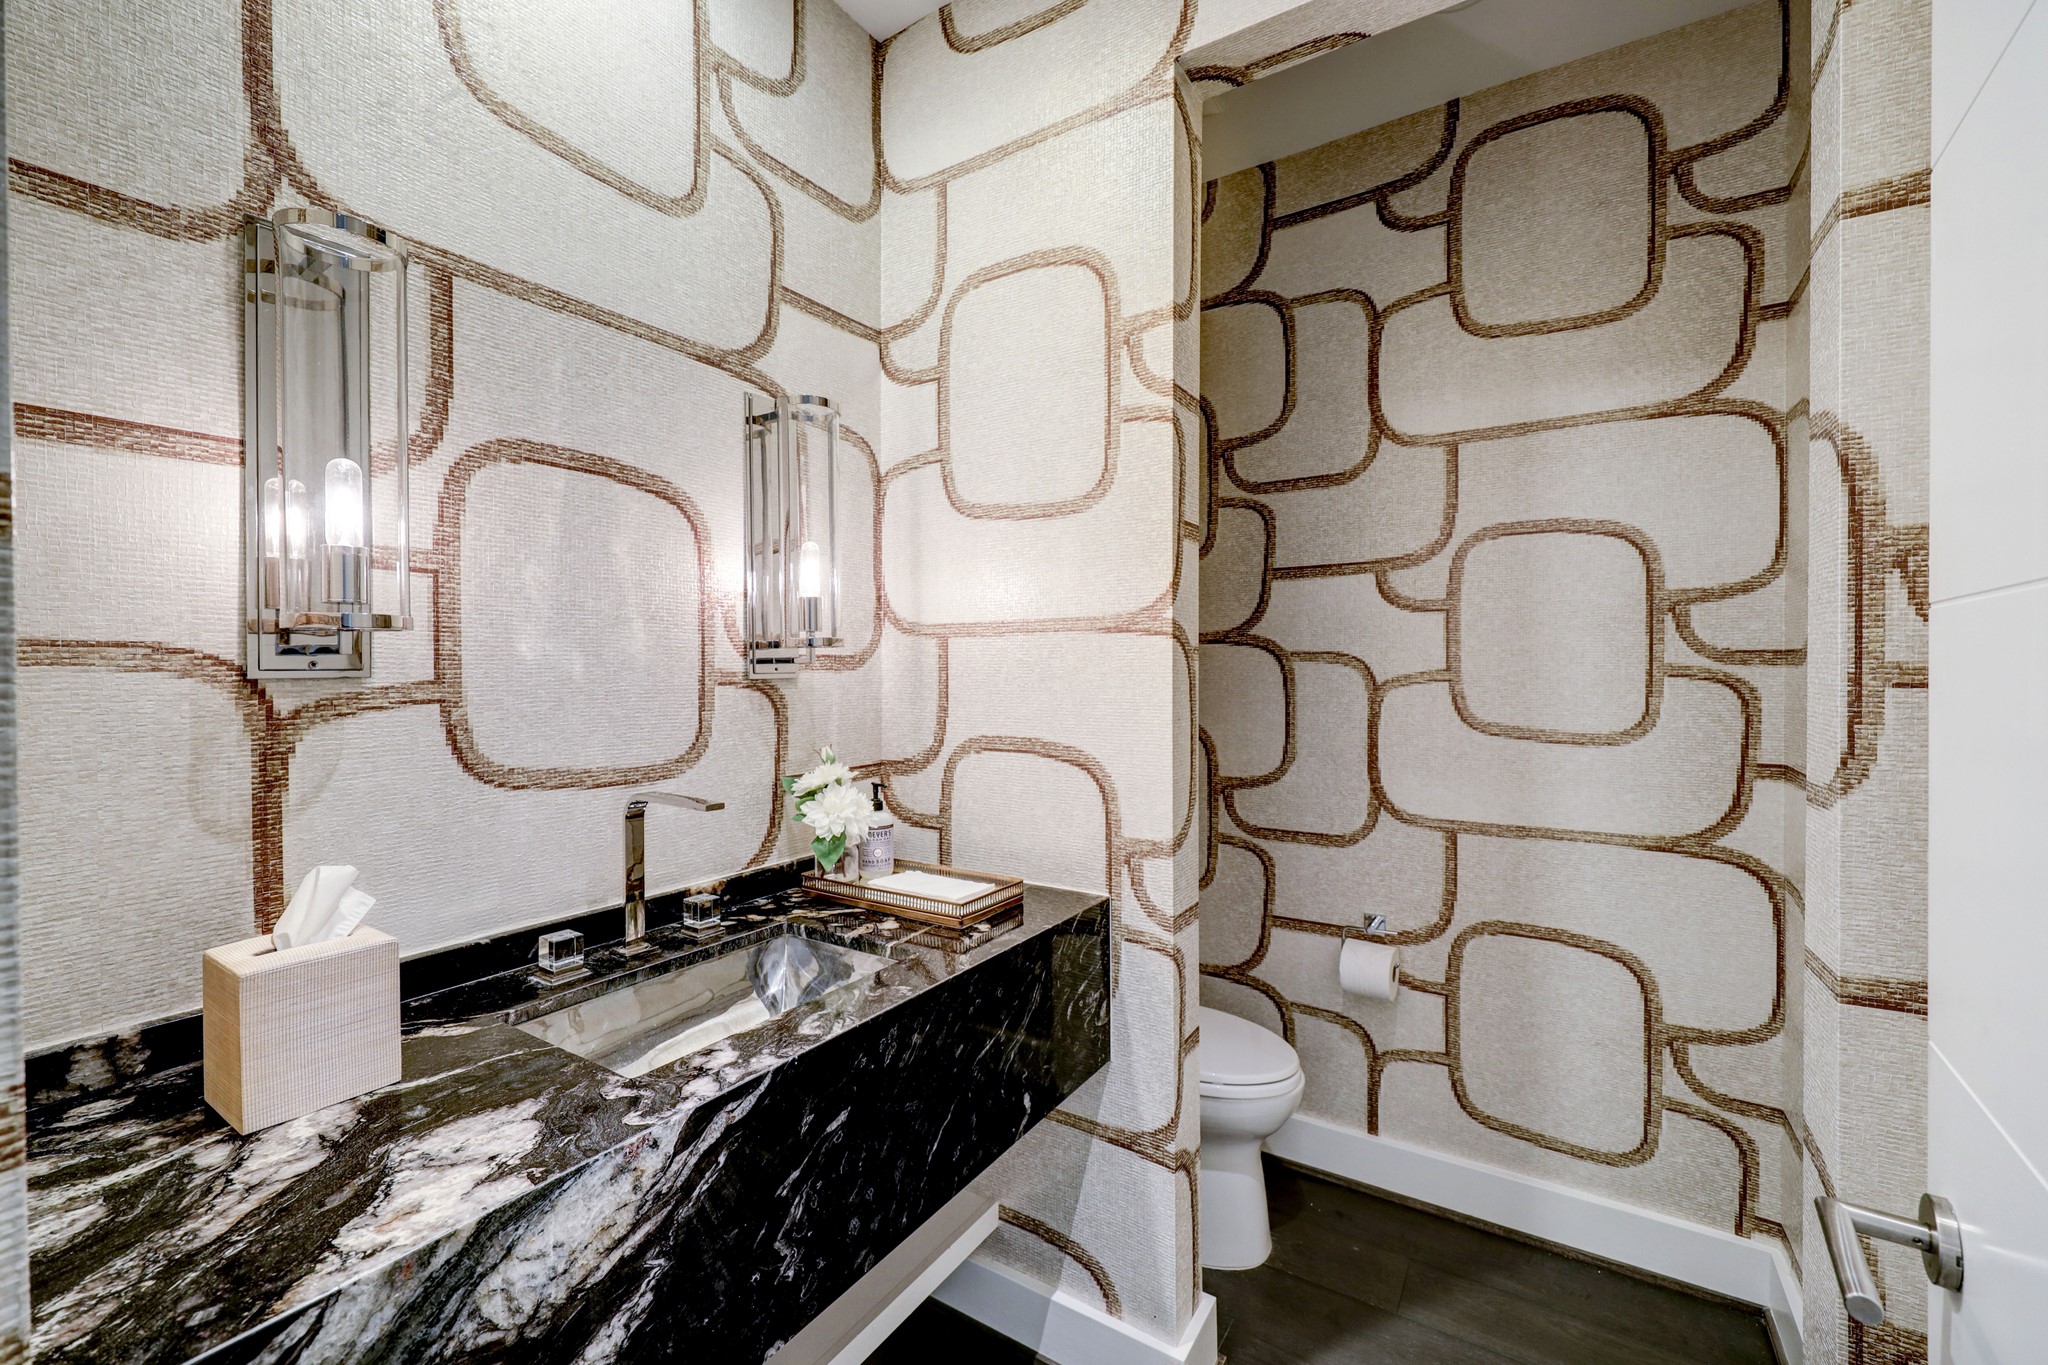 Custom wallpaper, rare marble and designer fixtures and sconces punctuate the powder room.